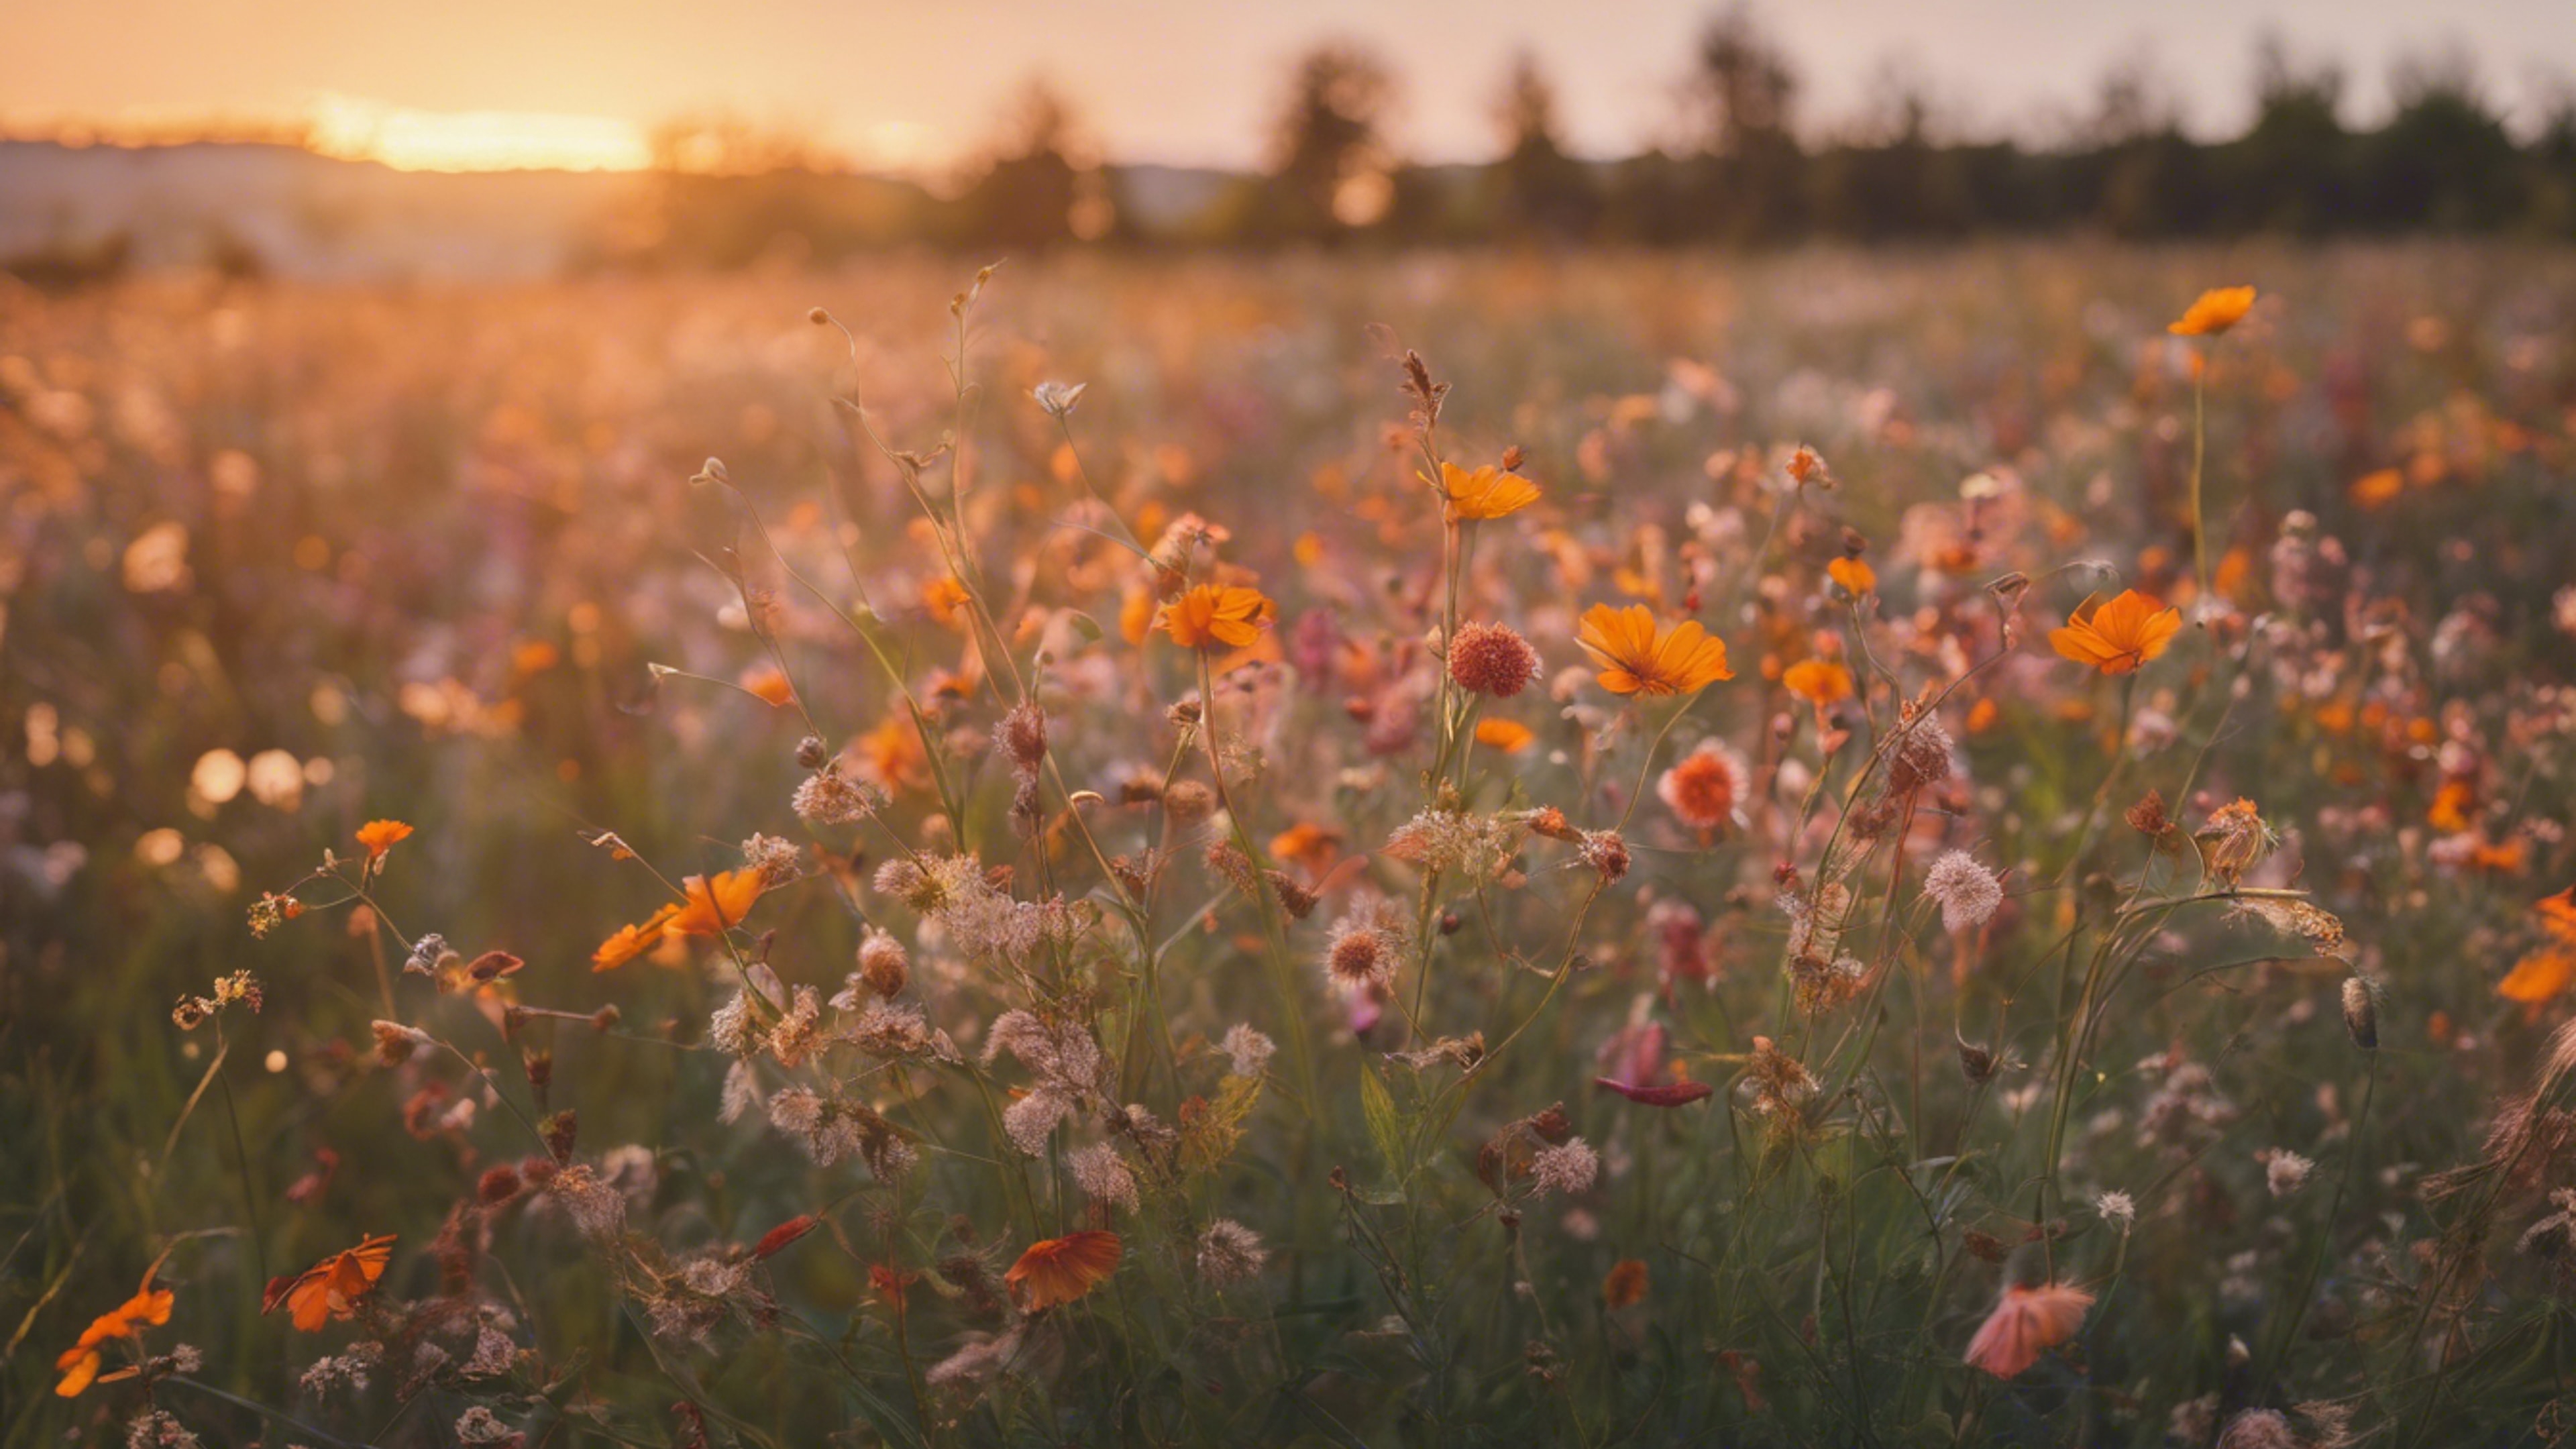 A nostalgic field of wildflowers in sunset hues. Tapet[1a5d684a5d8746a6914f]